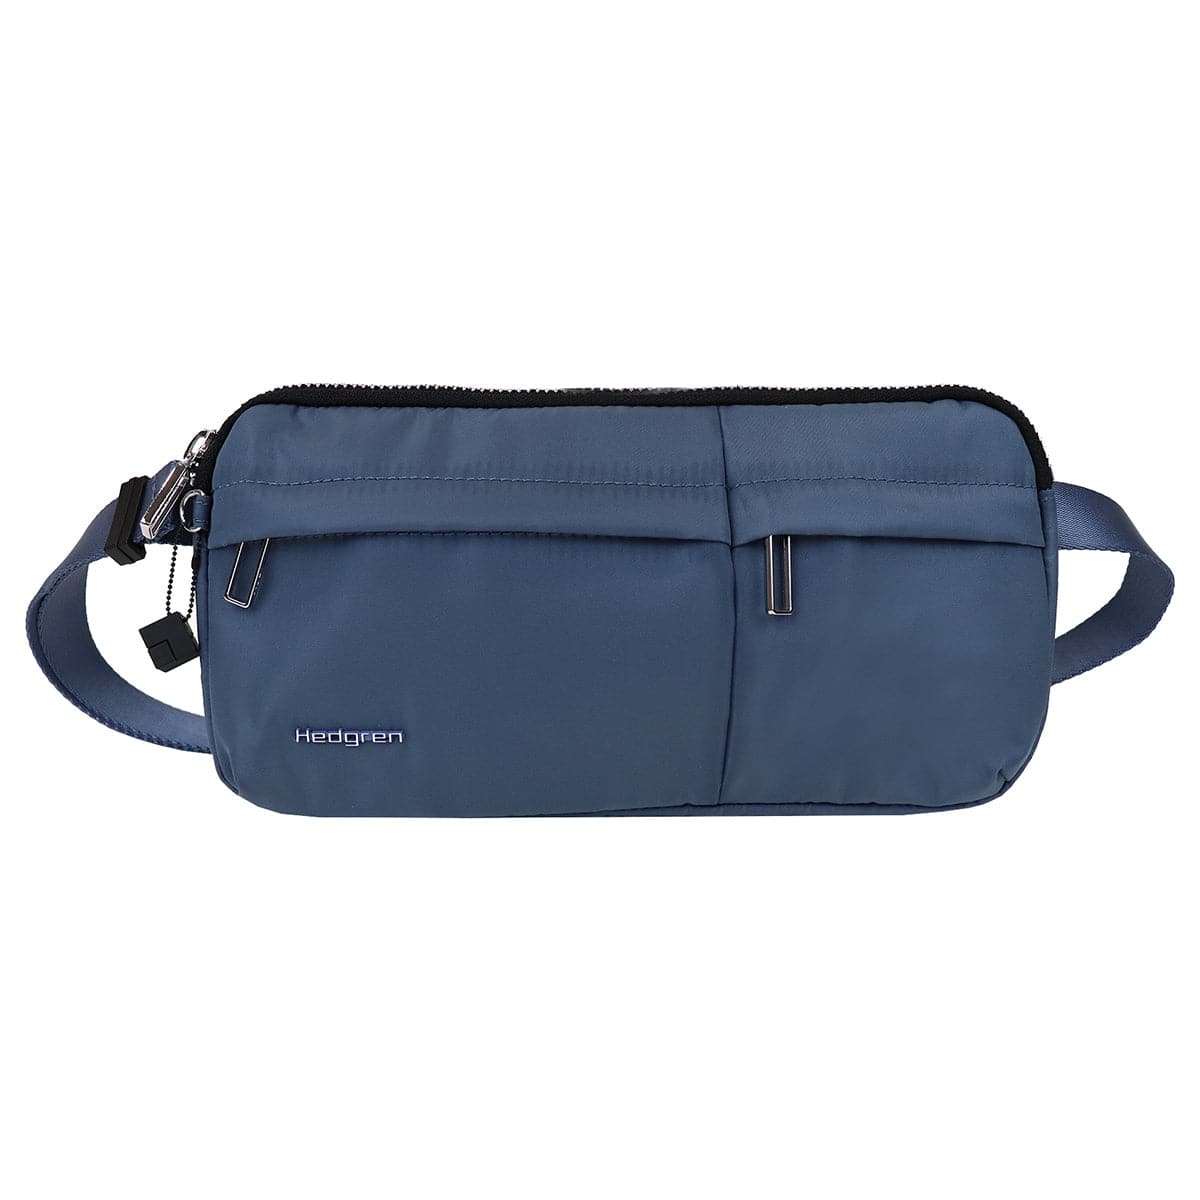 Hedgren Marcia Sustainably Made 2 in 1 Crossbody Bag